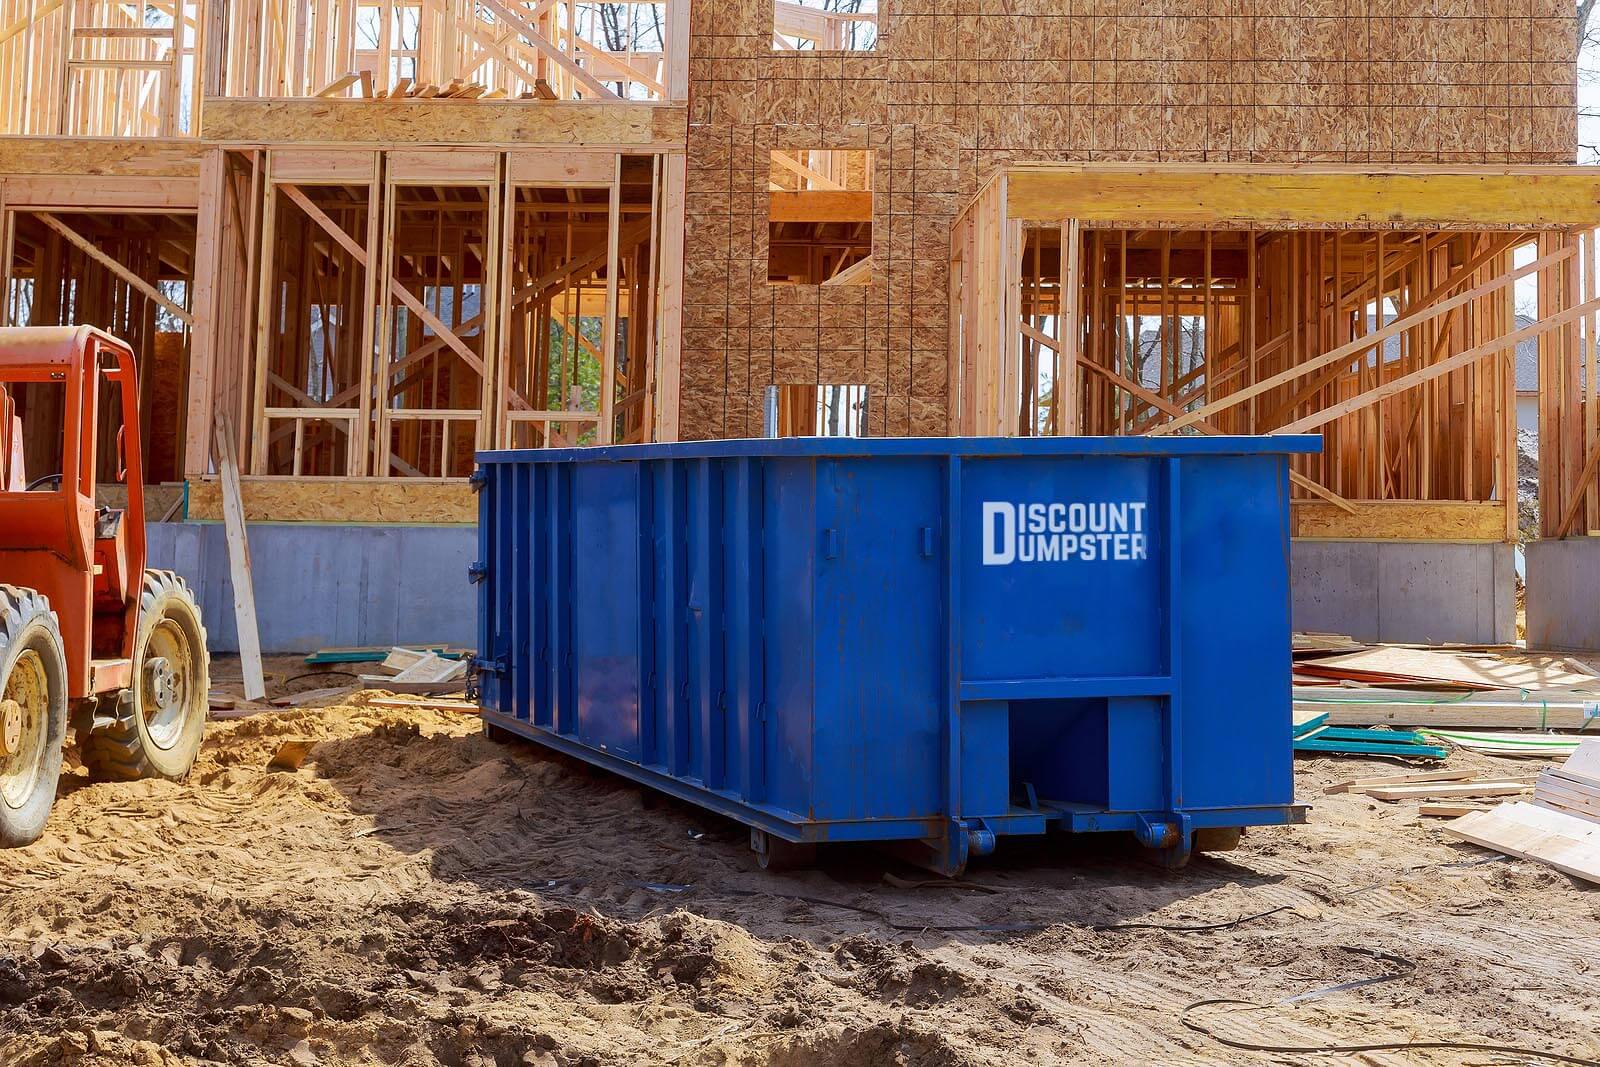 Discount dumpster handles the waste removal at your next home renovation without hassle in the chica Discount Dumpster Chicago (312)549-9198